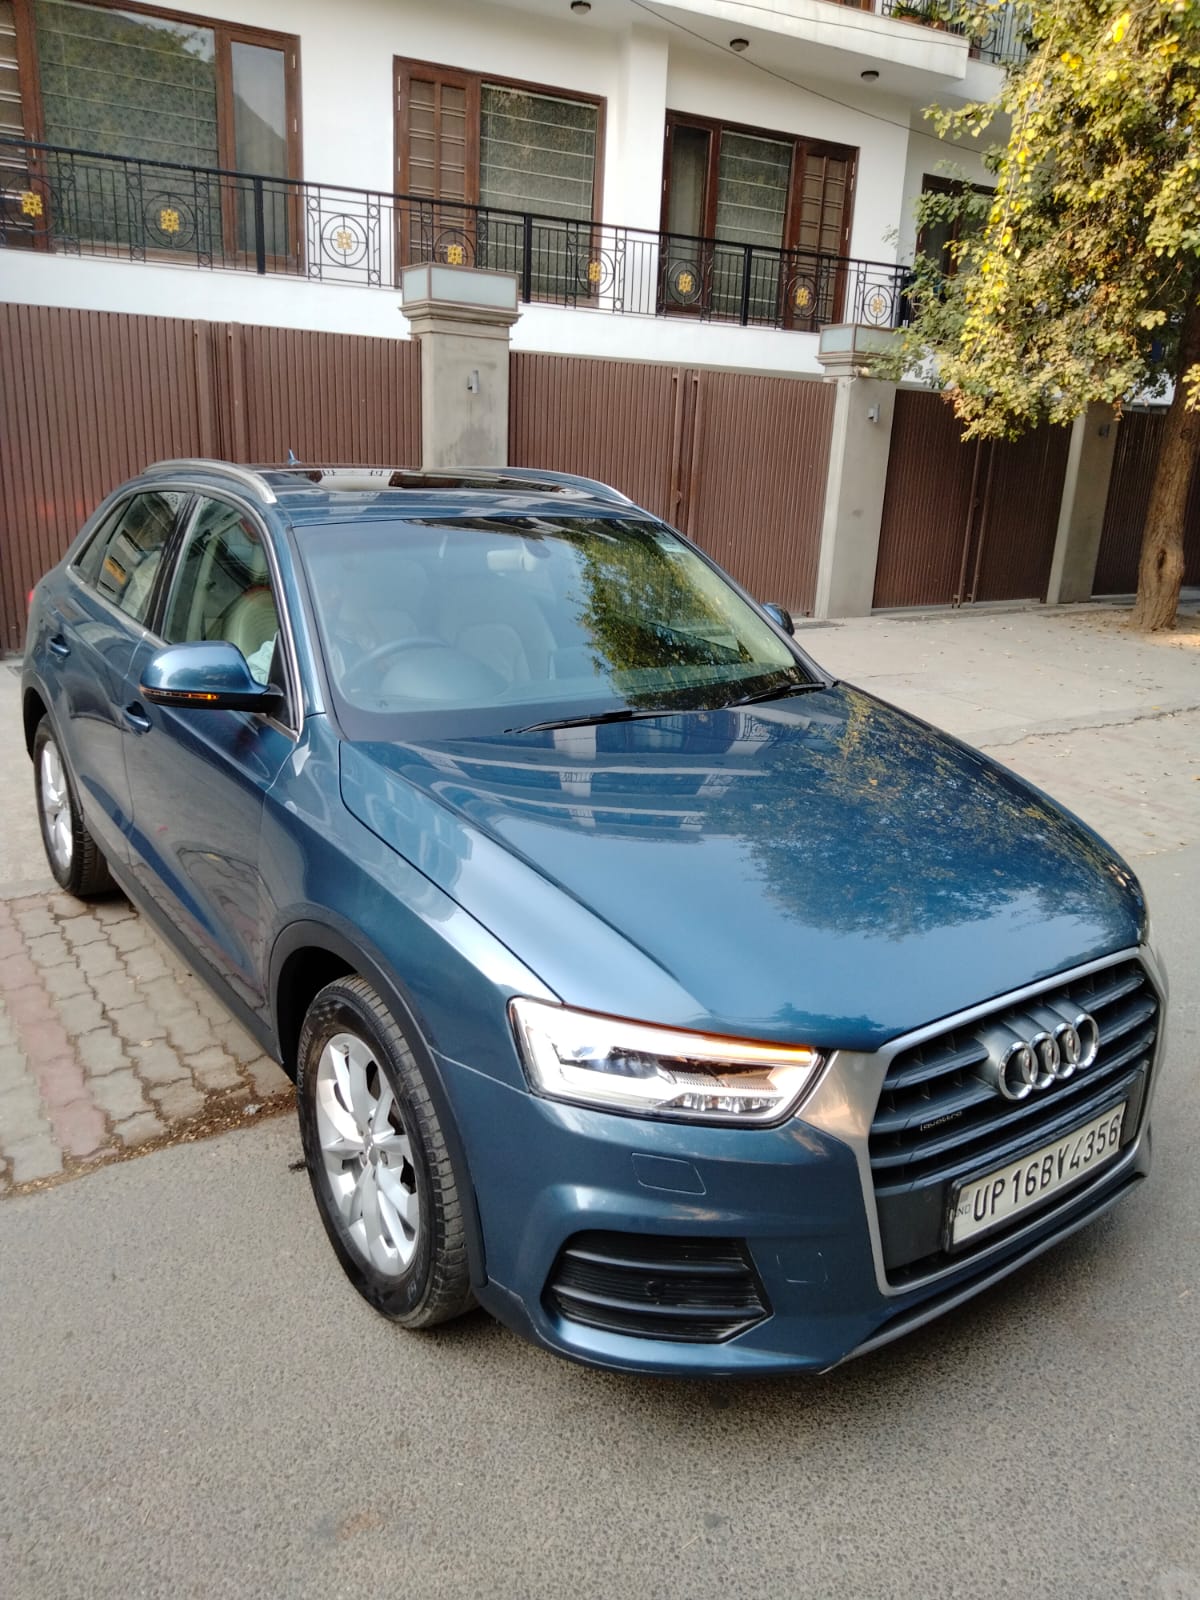 FOR SALE AUDI Q3 35 TDI QUATTRO PRIUAM PLUS WITH SUNROOF DIESAL CAR APRIL 2018 KMS  73599 WITH CO SERVICE HISTORY GOOD TYERS CONDITION INSHURED TILL 2024 UP 16 NOIDA NO NEW BATTERY 2ND KEY AVAILABLE ALL ORIGINAL PAINT CAR SCRECHLESS CAR Jolly motors chittranjan park South delhi near nehru place 9810012032 9910089032 Send location here.